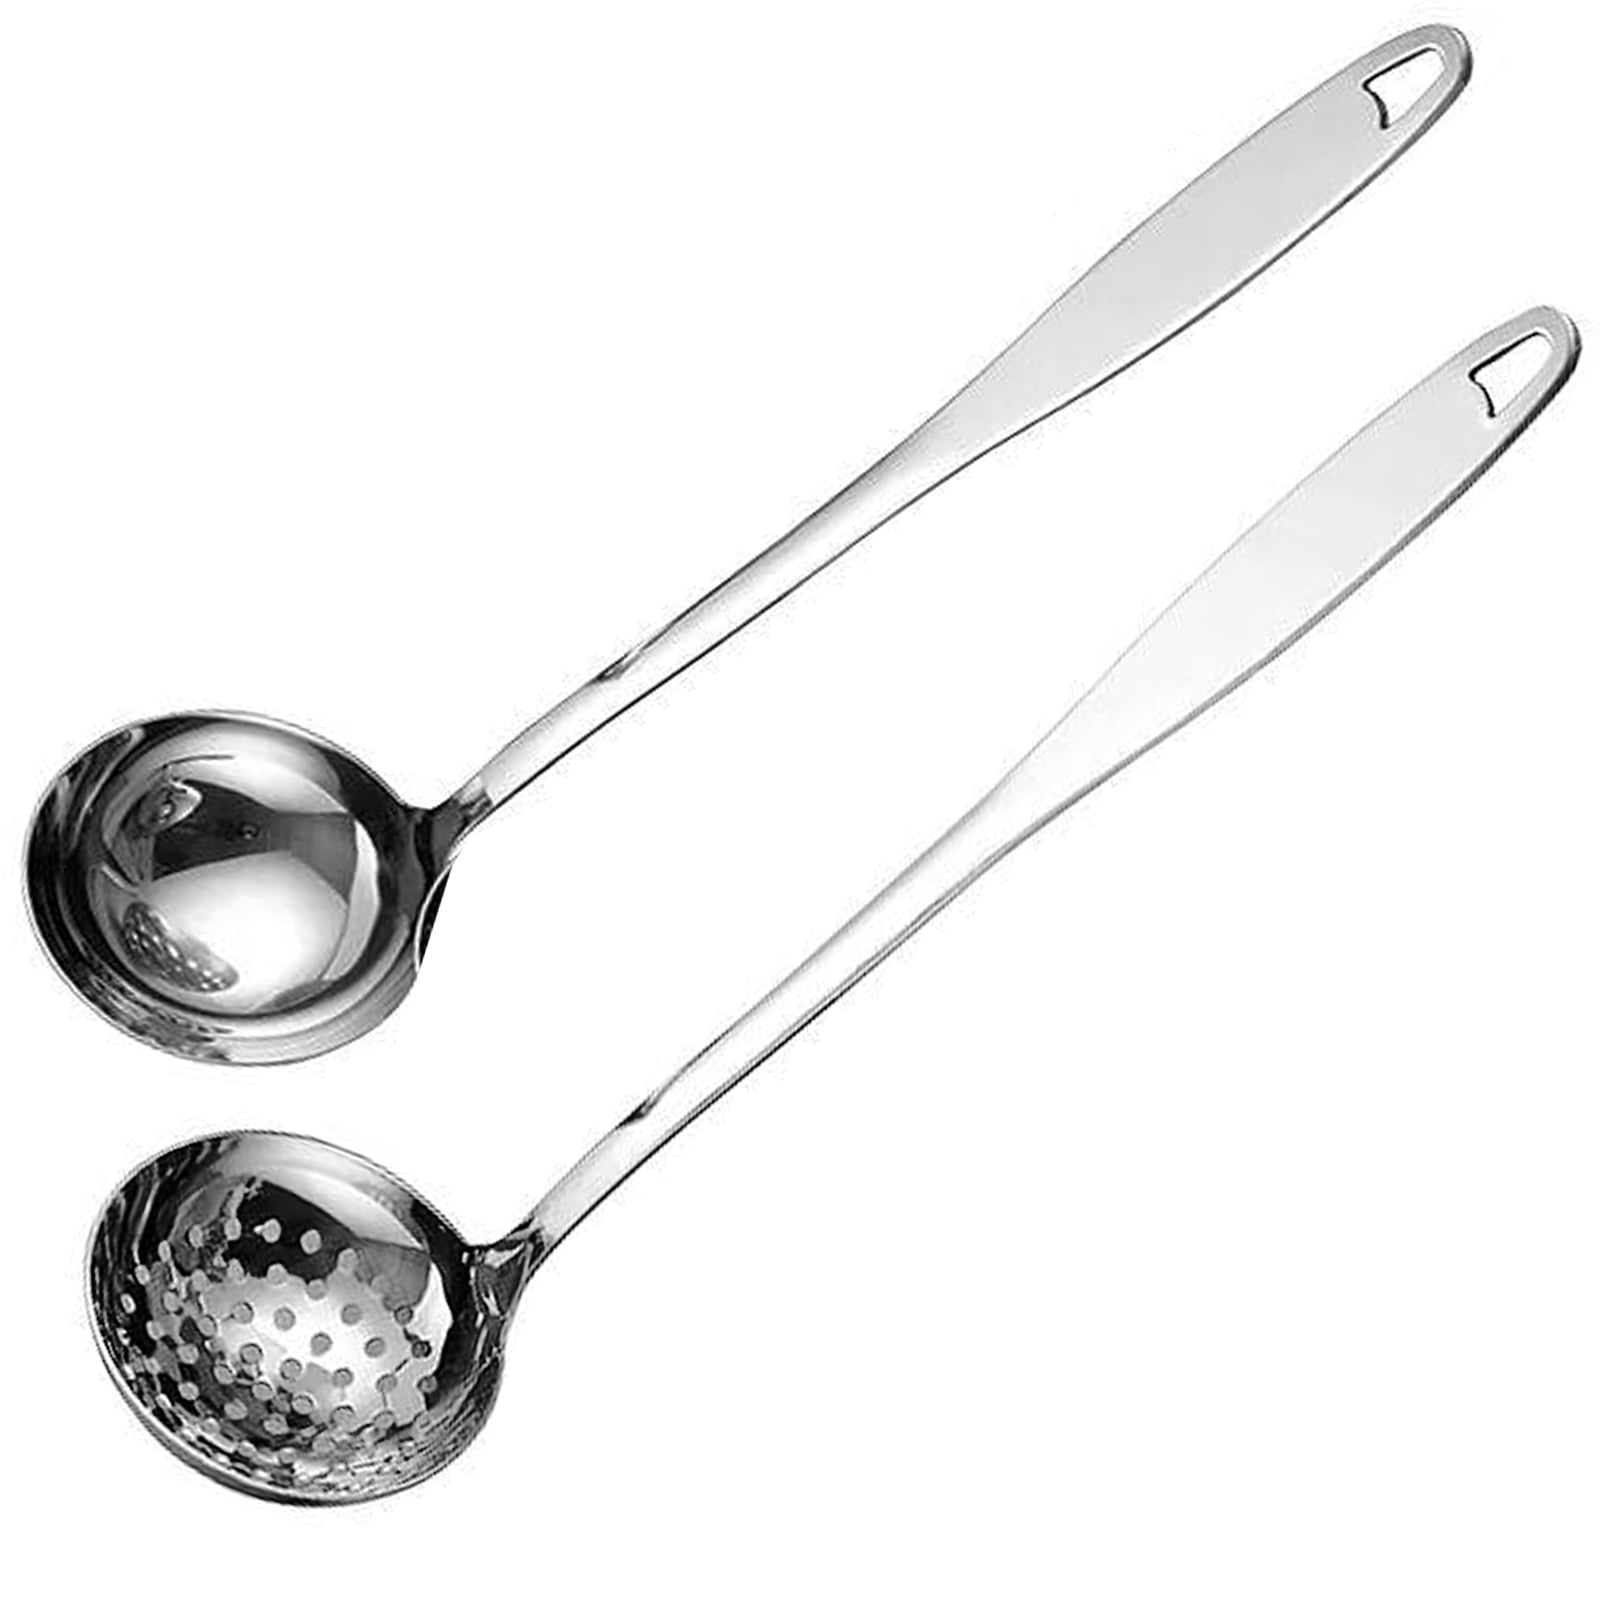 Large Stainless Steel Soup Ladle I All-Clad